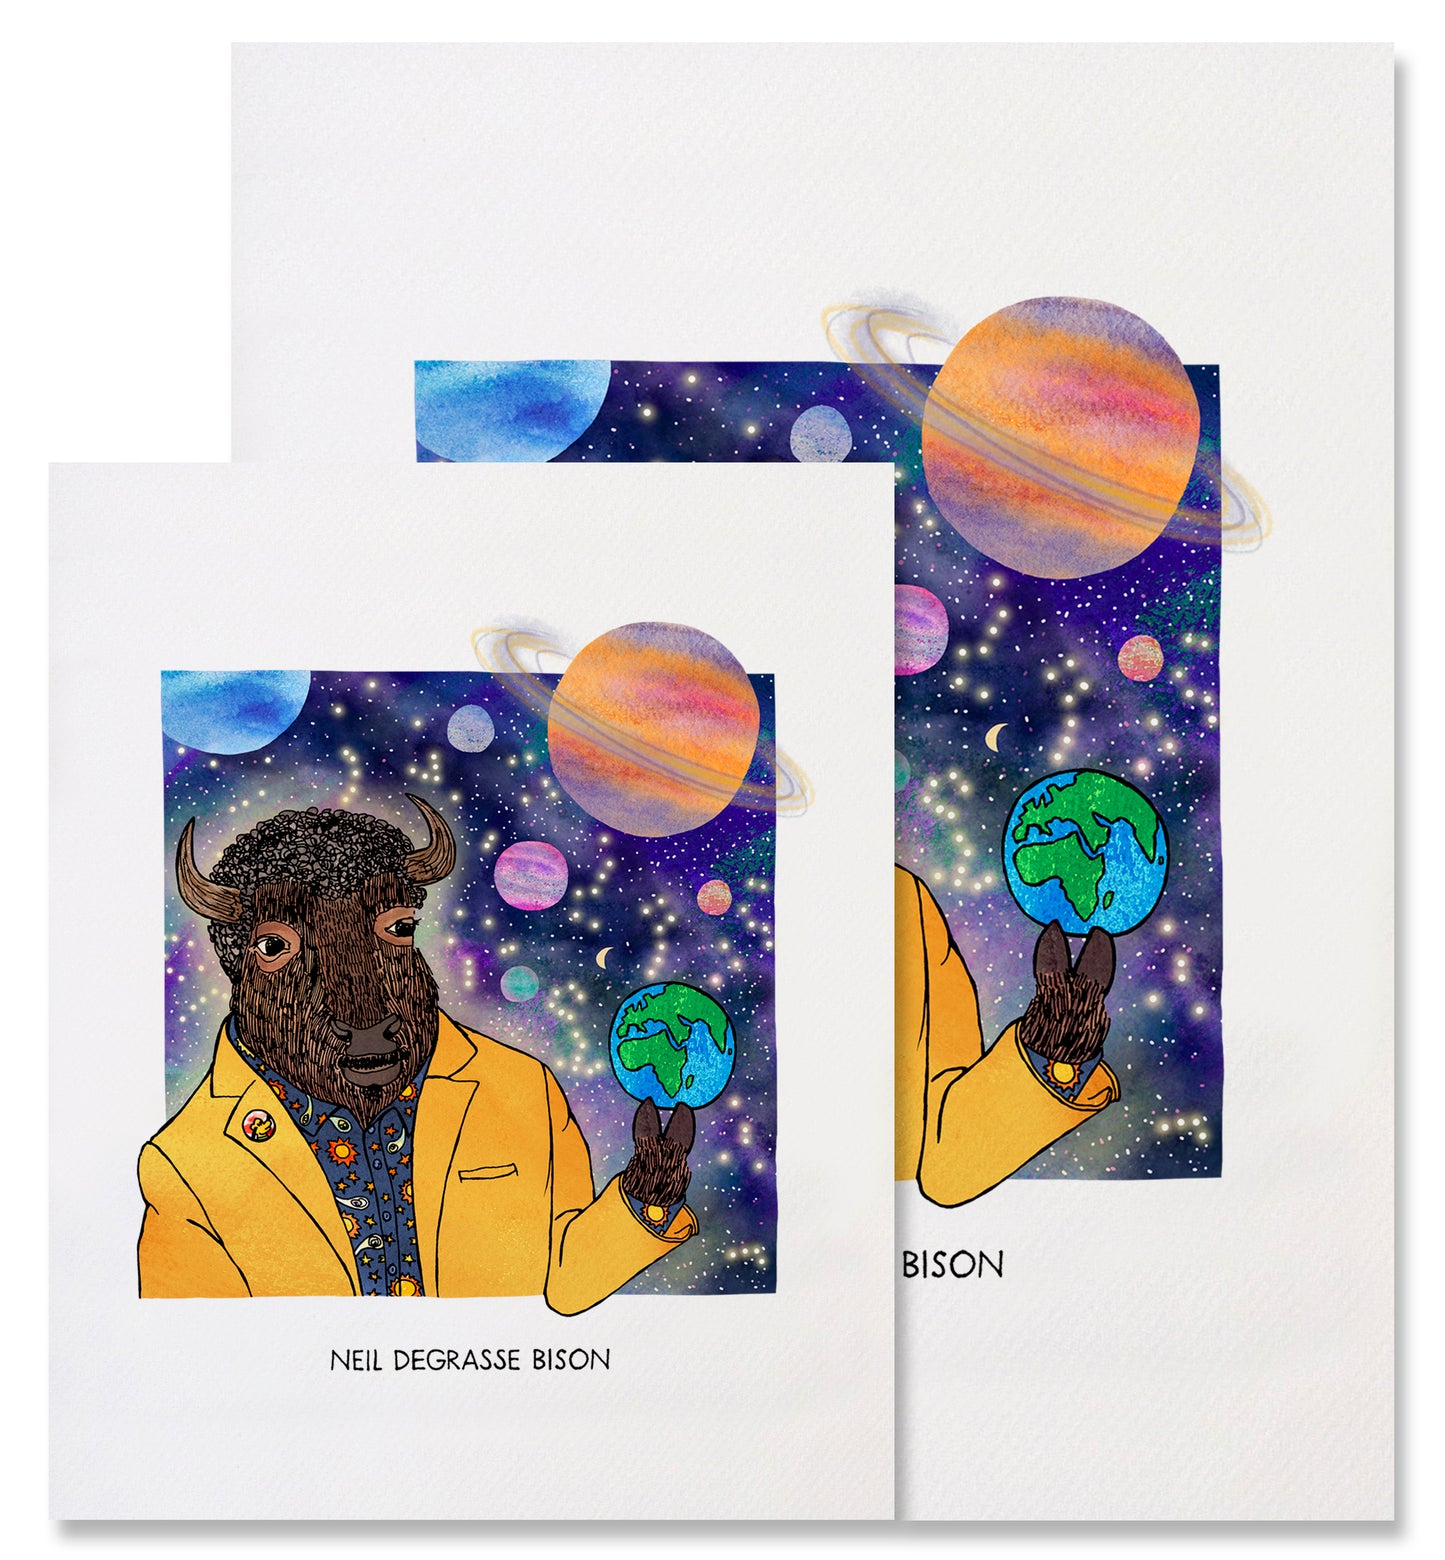 Neil deGrasse Bison - Illustrated Funny Pun Everyday Card